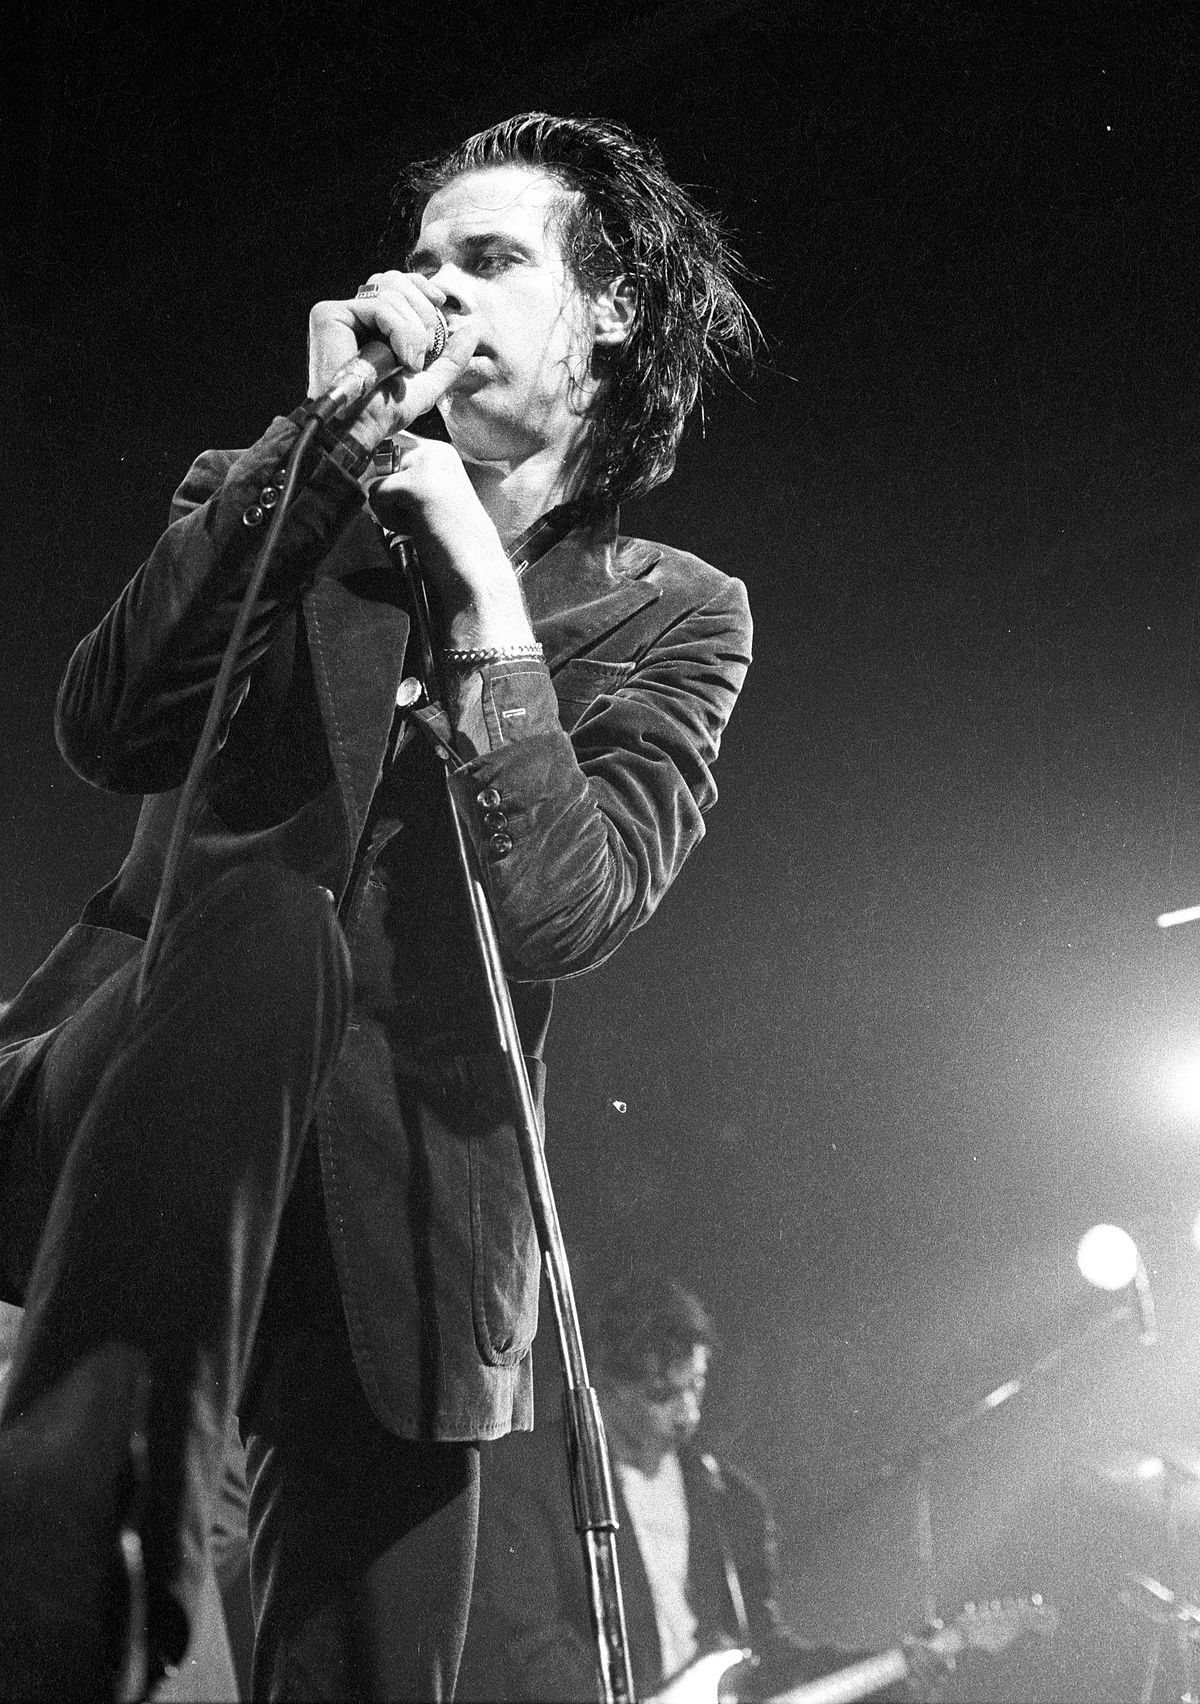 Nick Cave photo 12 of 59 pics, wallpaper - photo #1312649 - ThePlace2